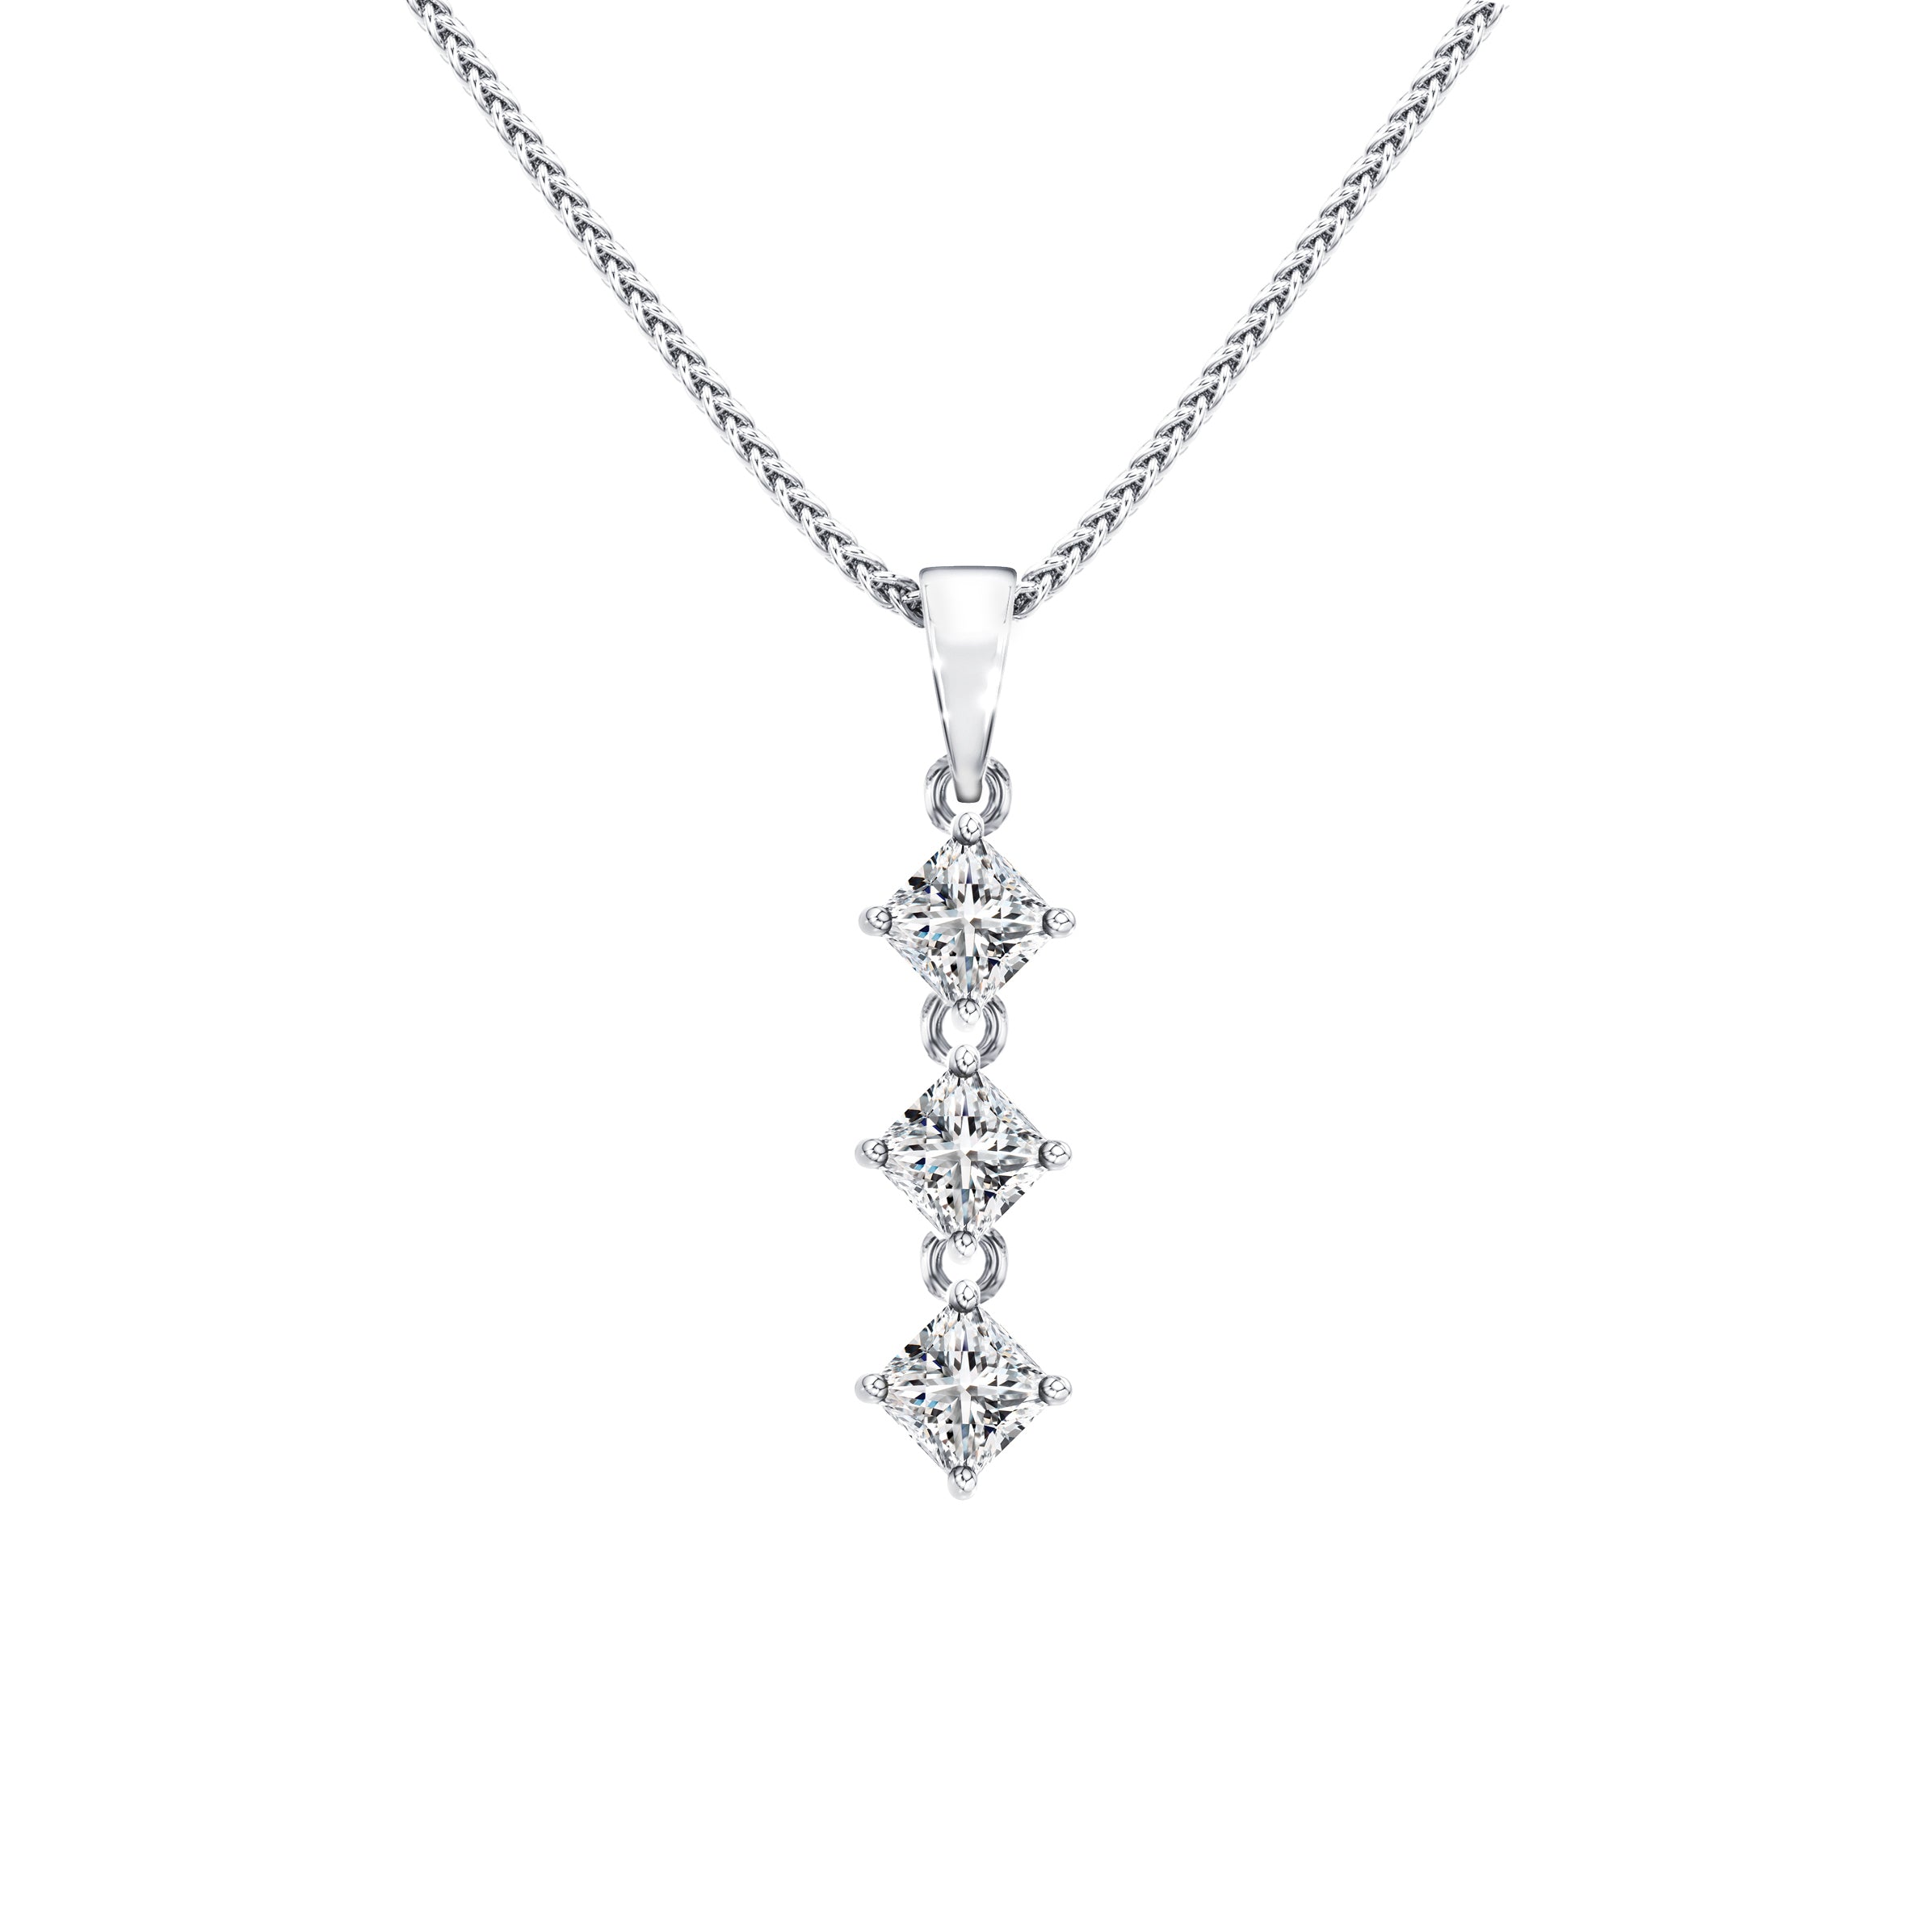 Shimansky - My Girl 3 Drop Diamond Pendant 0.40ct Crafted in 14K White Gold